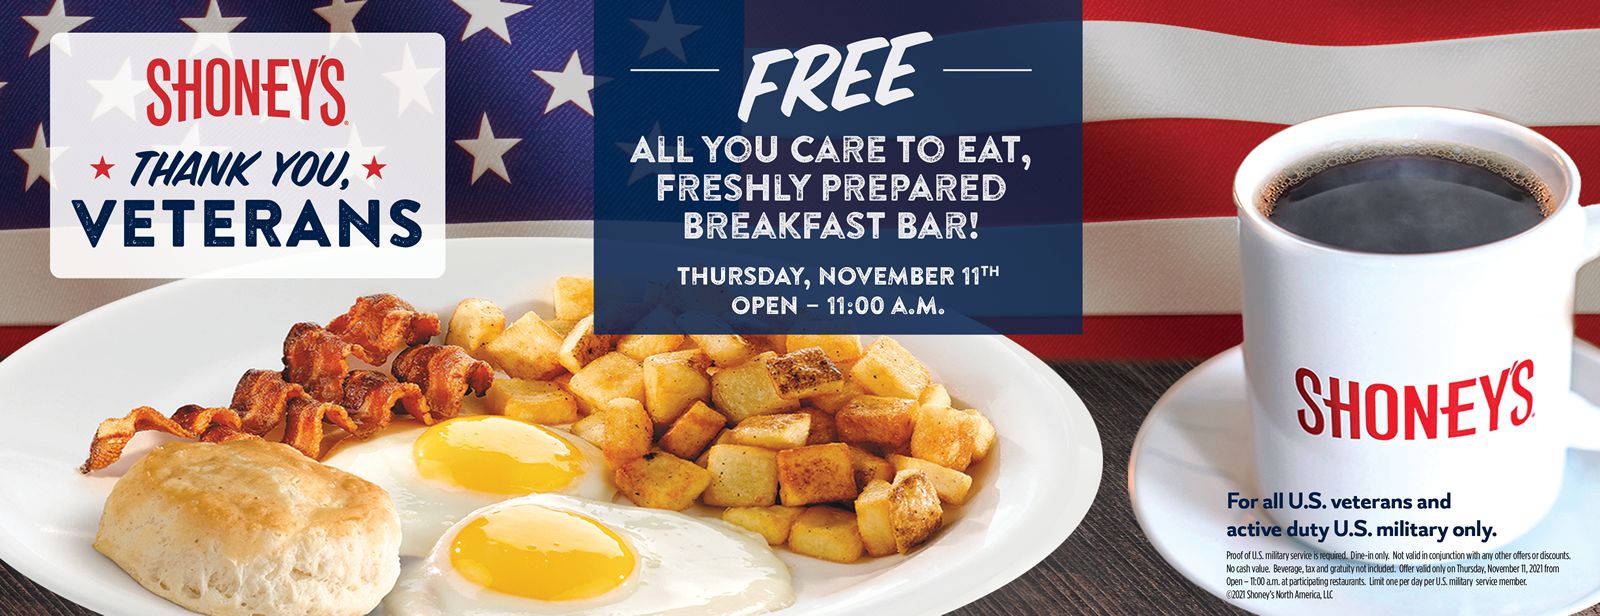 Shoney's To Offer a Free All You Care To Eat, Freshly Prepared Breakfast Bar for All Military Past and Present on Veterans Day, Its Heroes' Holiday: Thursday, November 11, 2021